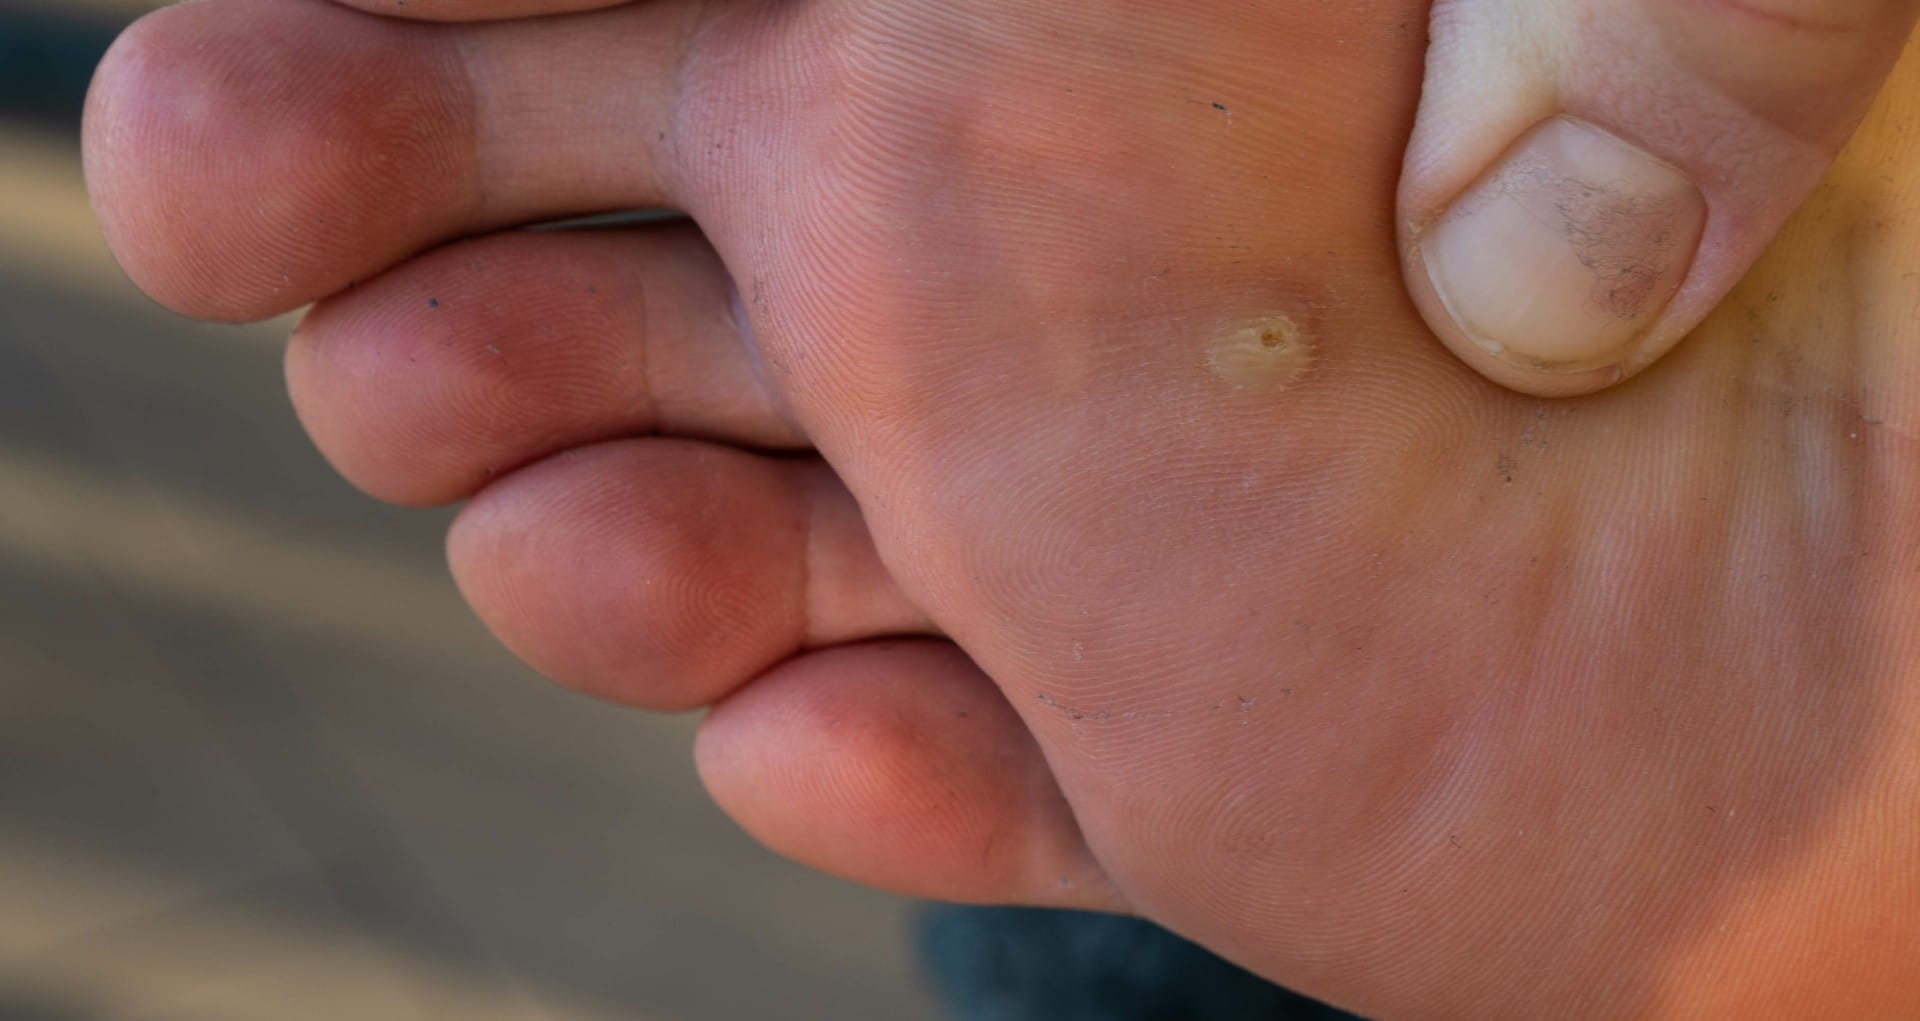 a foot with a plantar wart